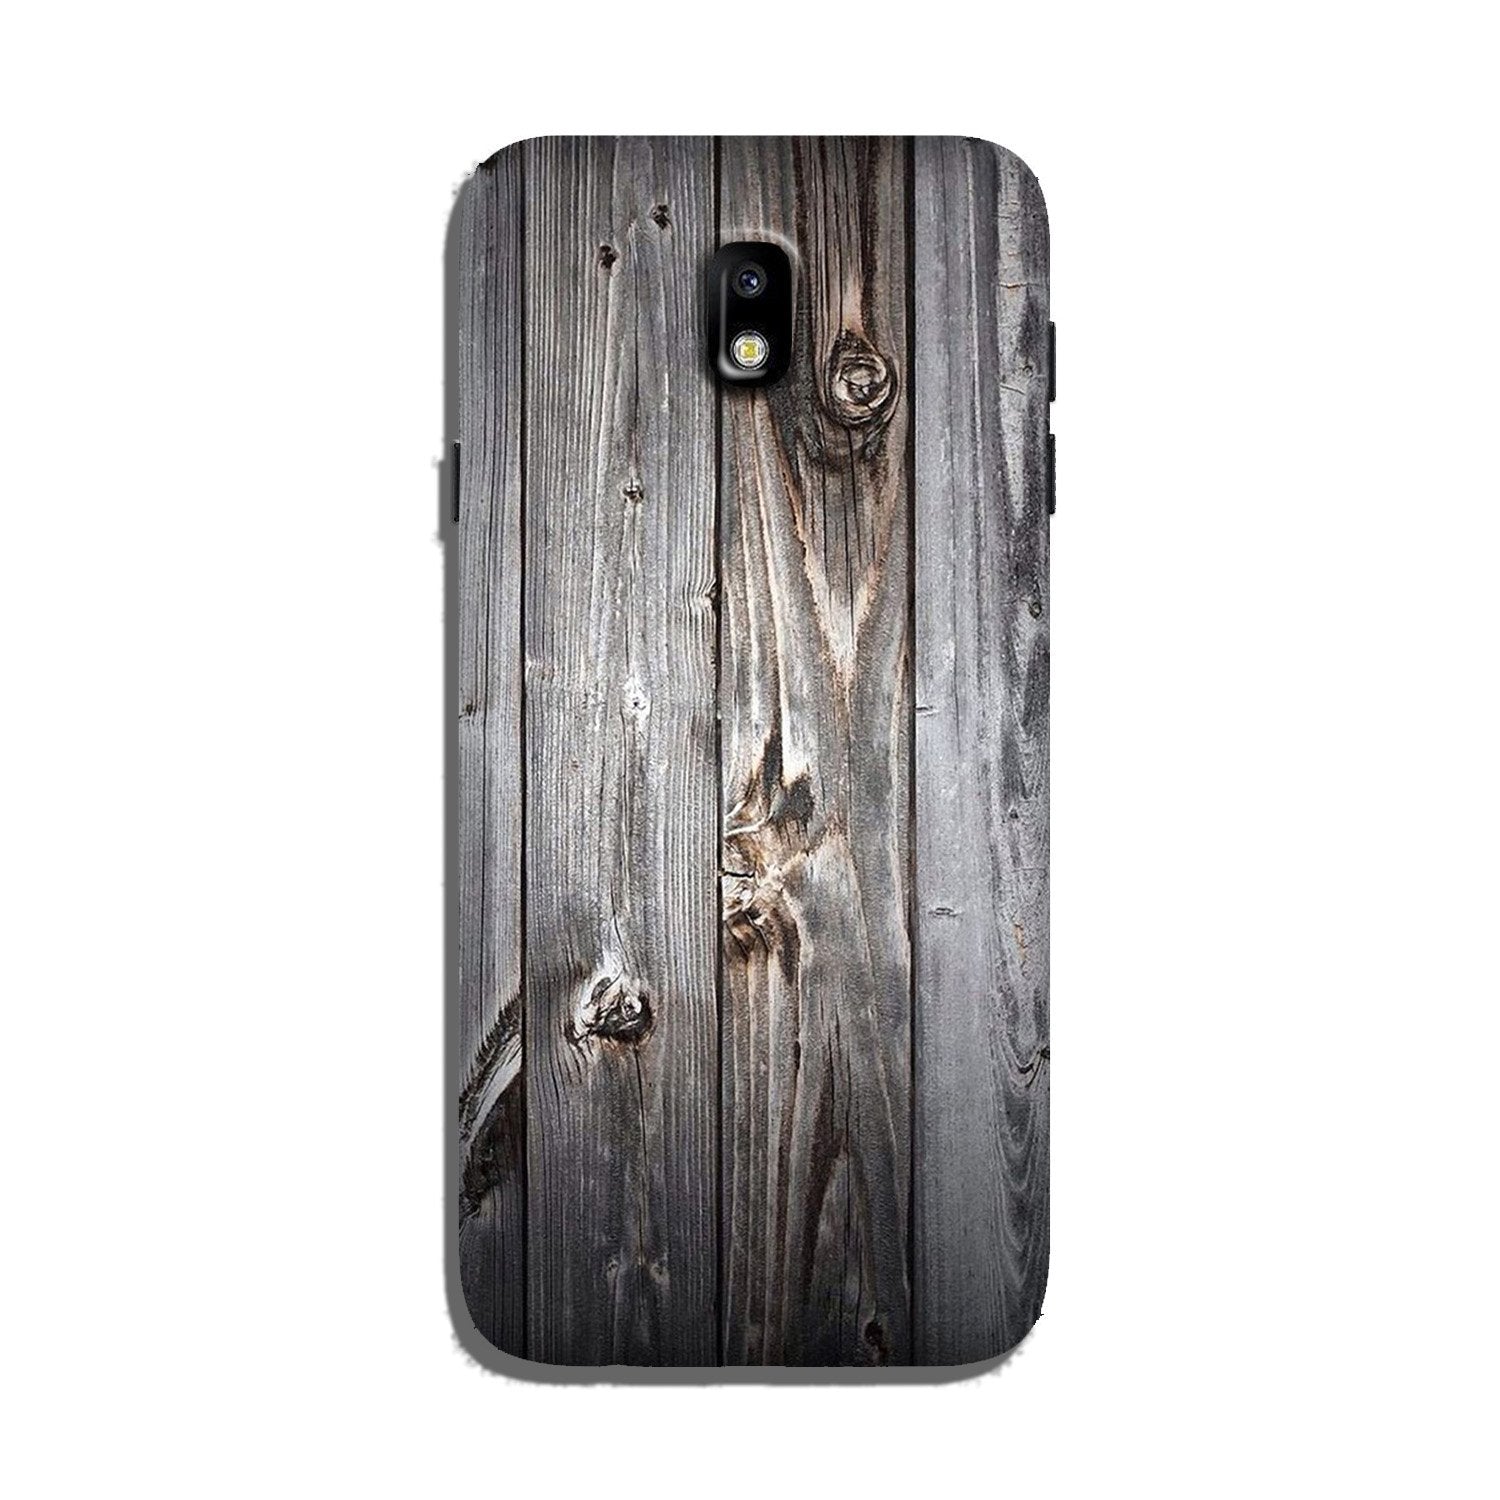 Wooden Look Case for Galaxy J7 Pro(Design - 114)